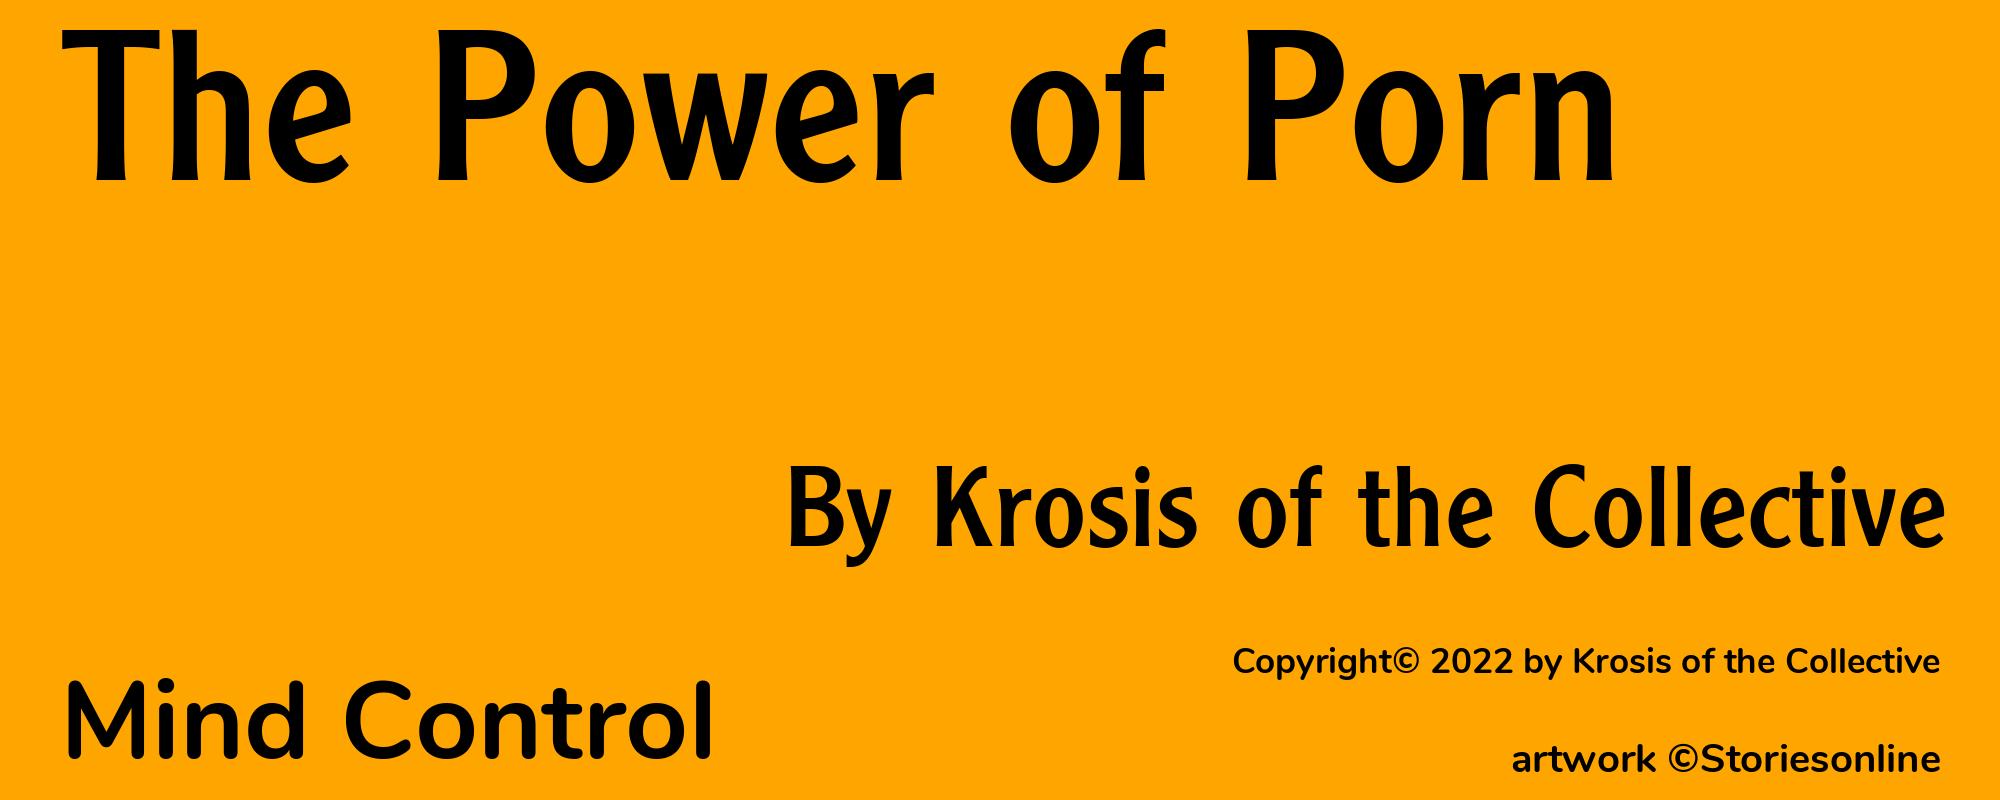 The Power of Porn - Cover